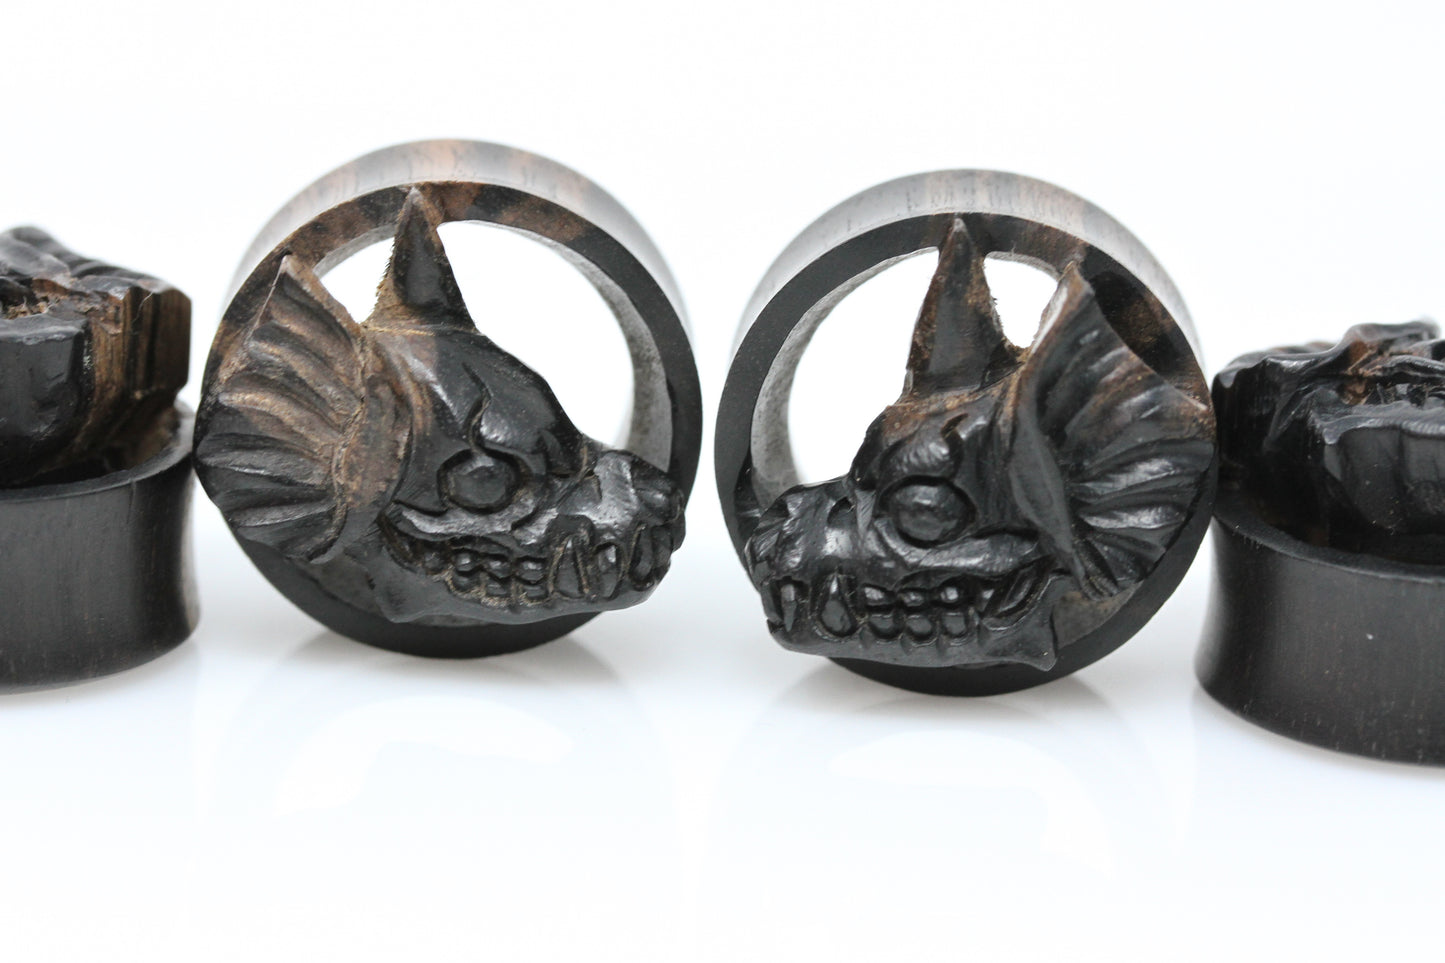 Wood skull tunnels stretched ears